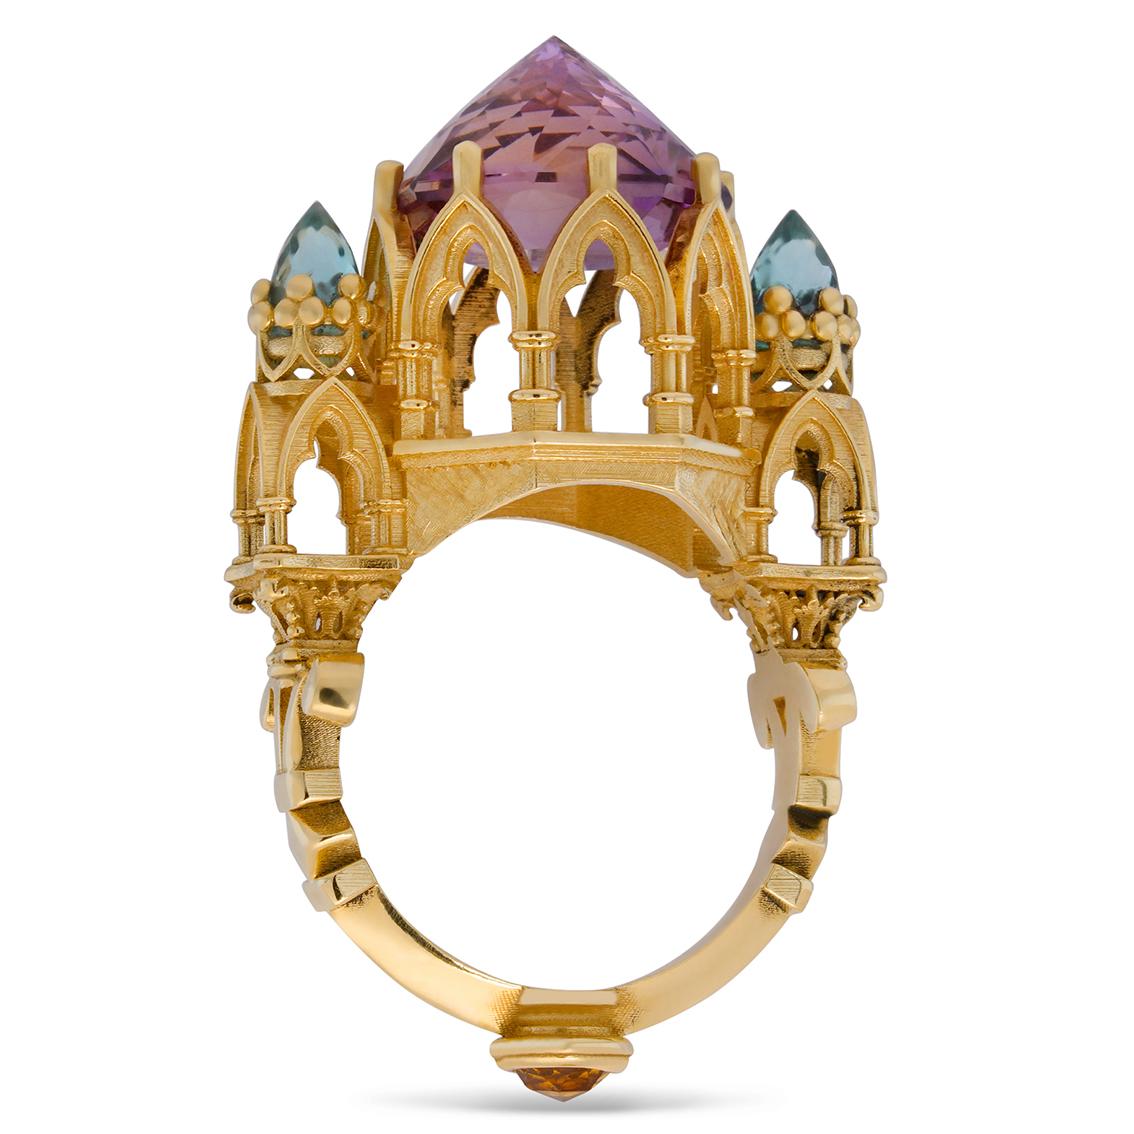 Conjuring the rich blue, purple, and gold hues of the famed stained glass windows in the Apse of Sainte-Chapelle France, this enchanting ring is a truly marvellous one of a kind piece.

Exquisitely handcrafted in 9kt yellow gold this stunning ring